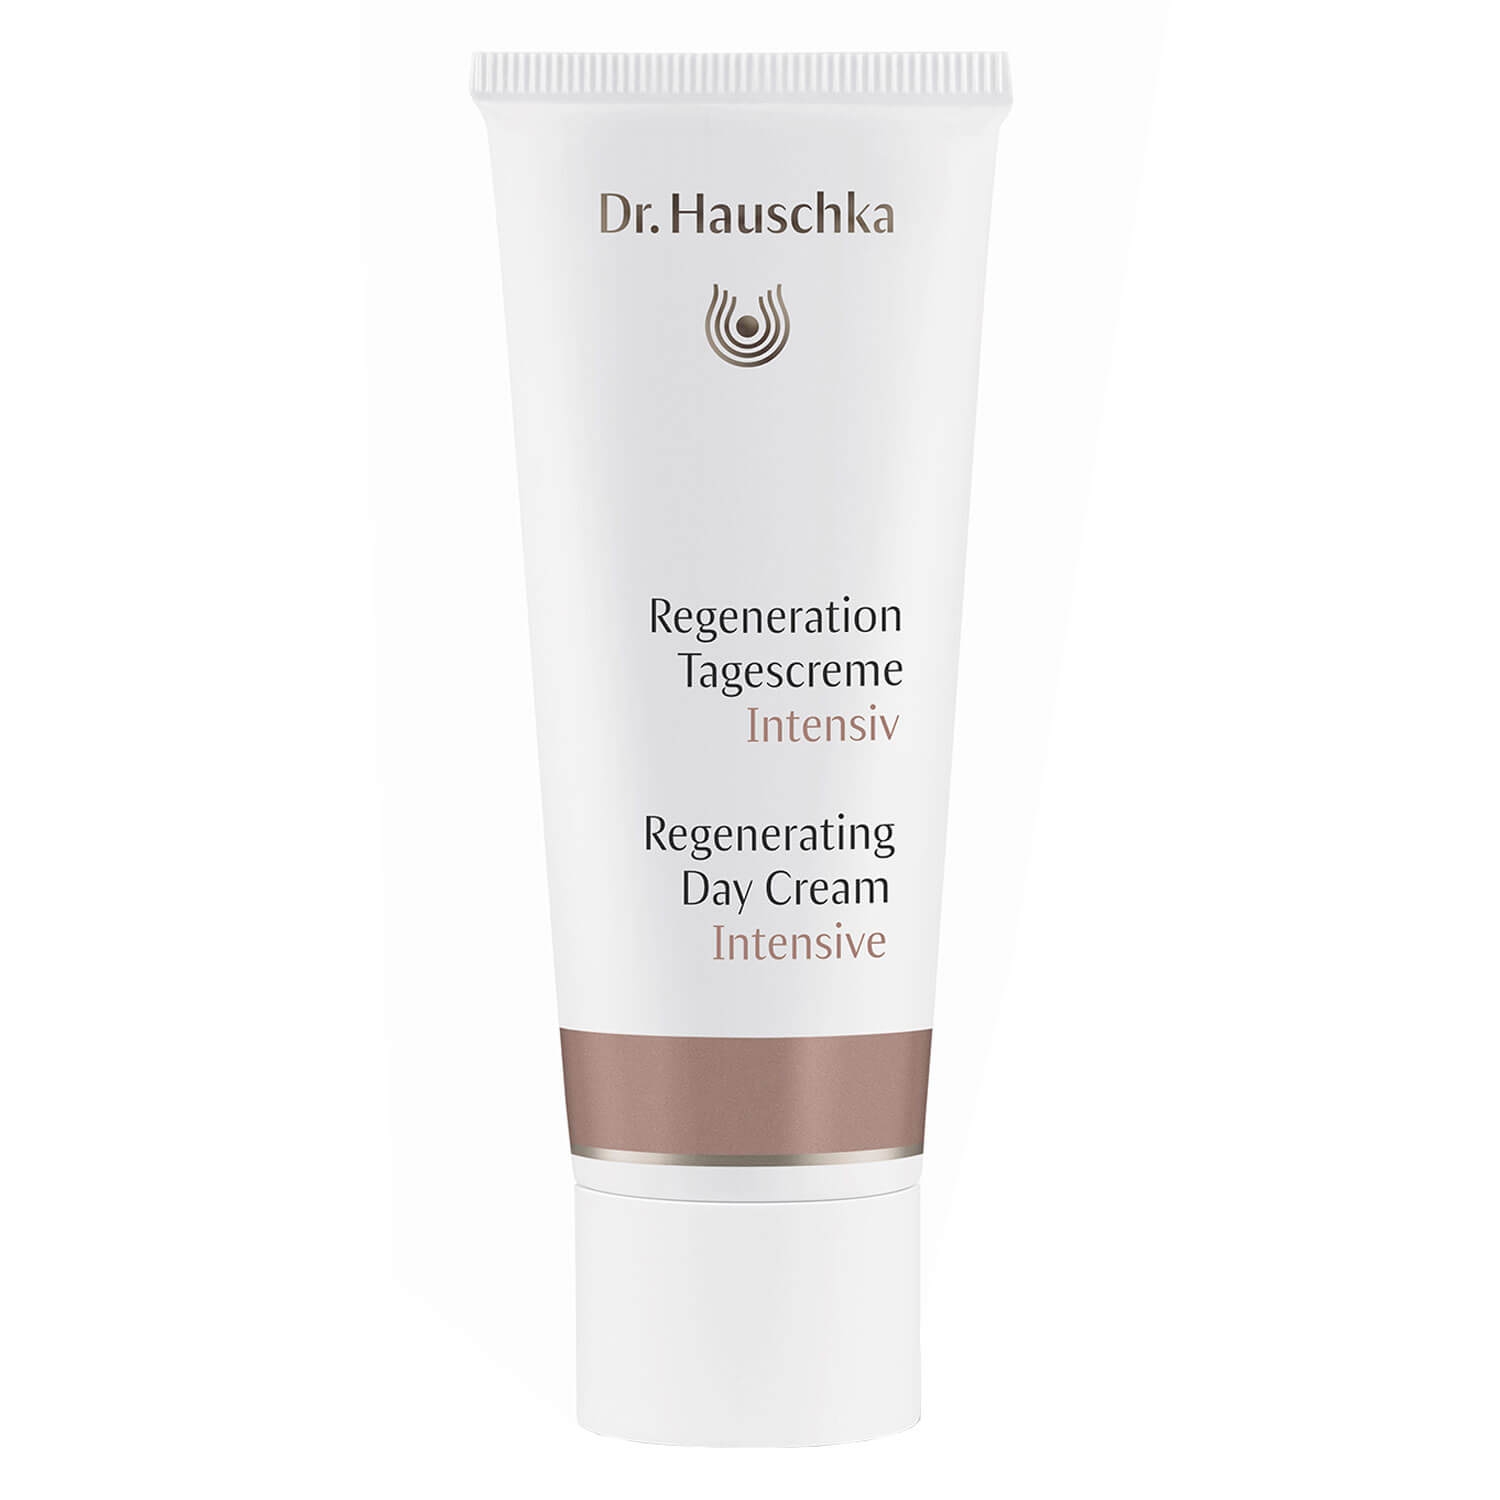 Product image from Dr. Hauschka - Regeneration Tagescreme Intensiv